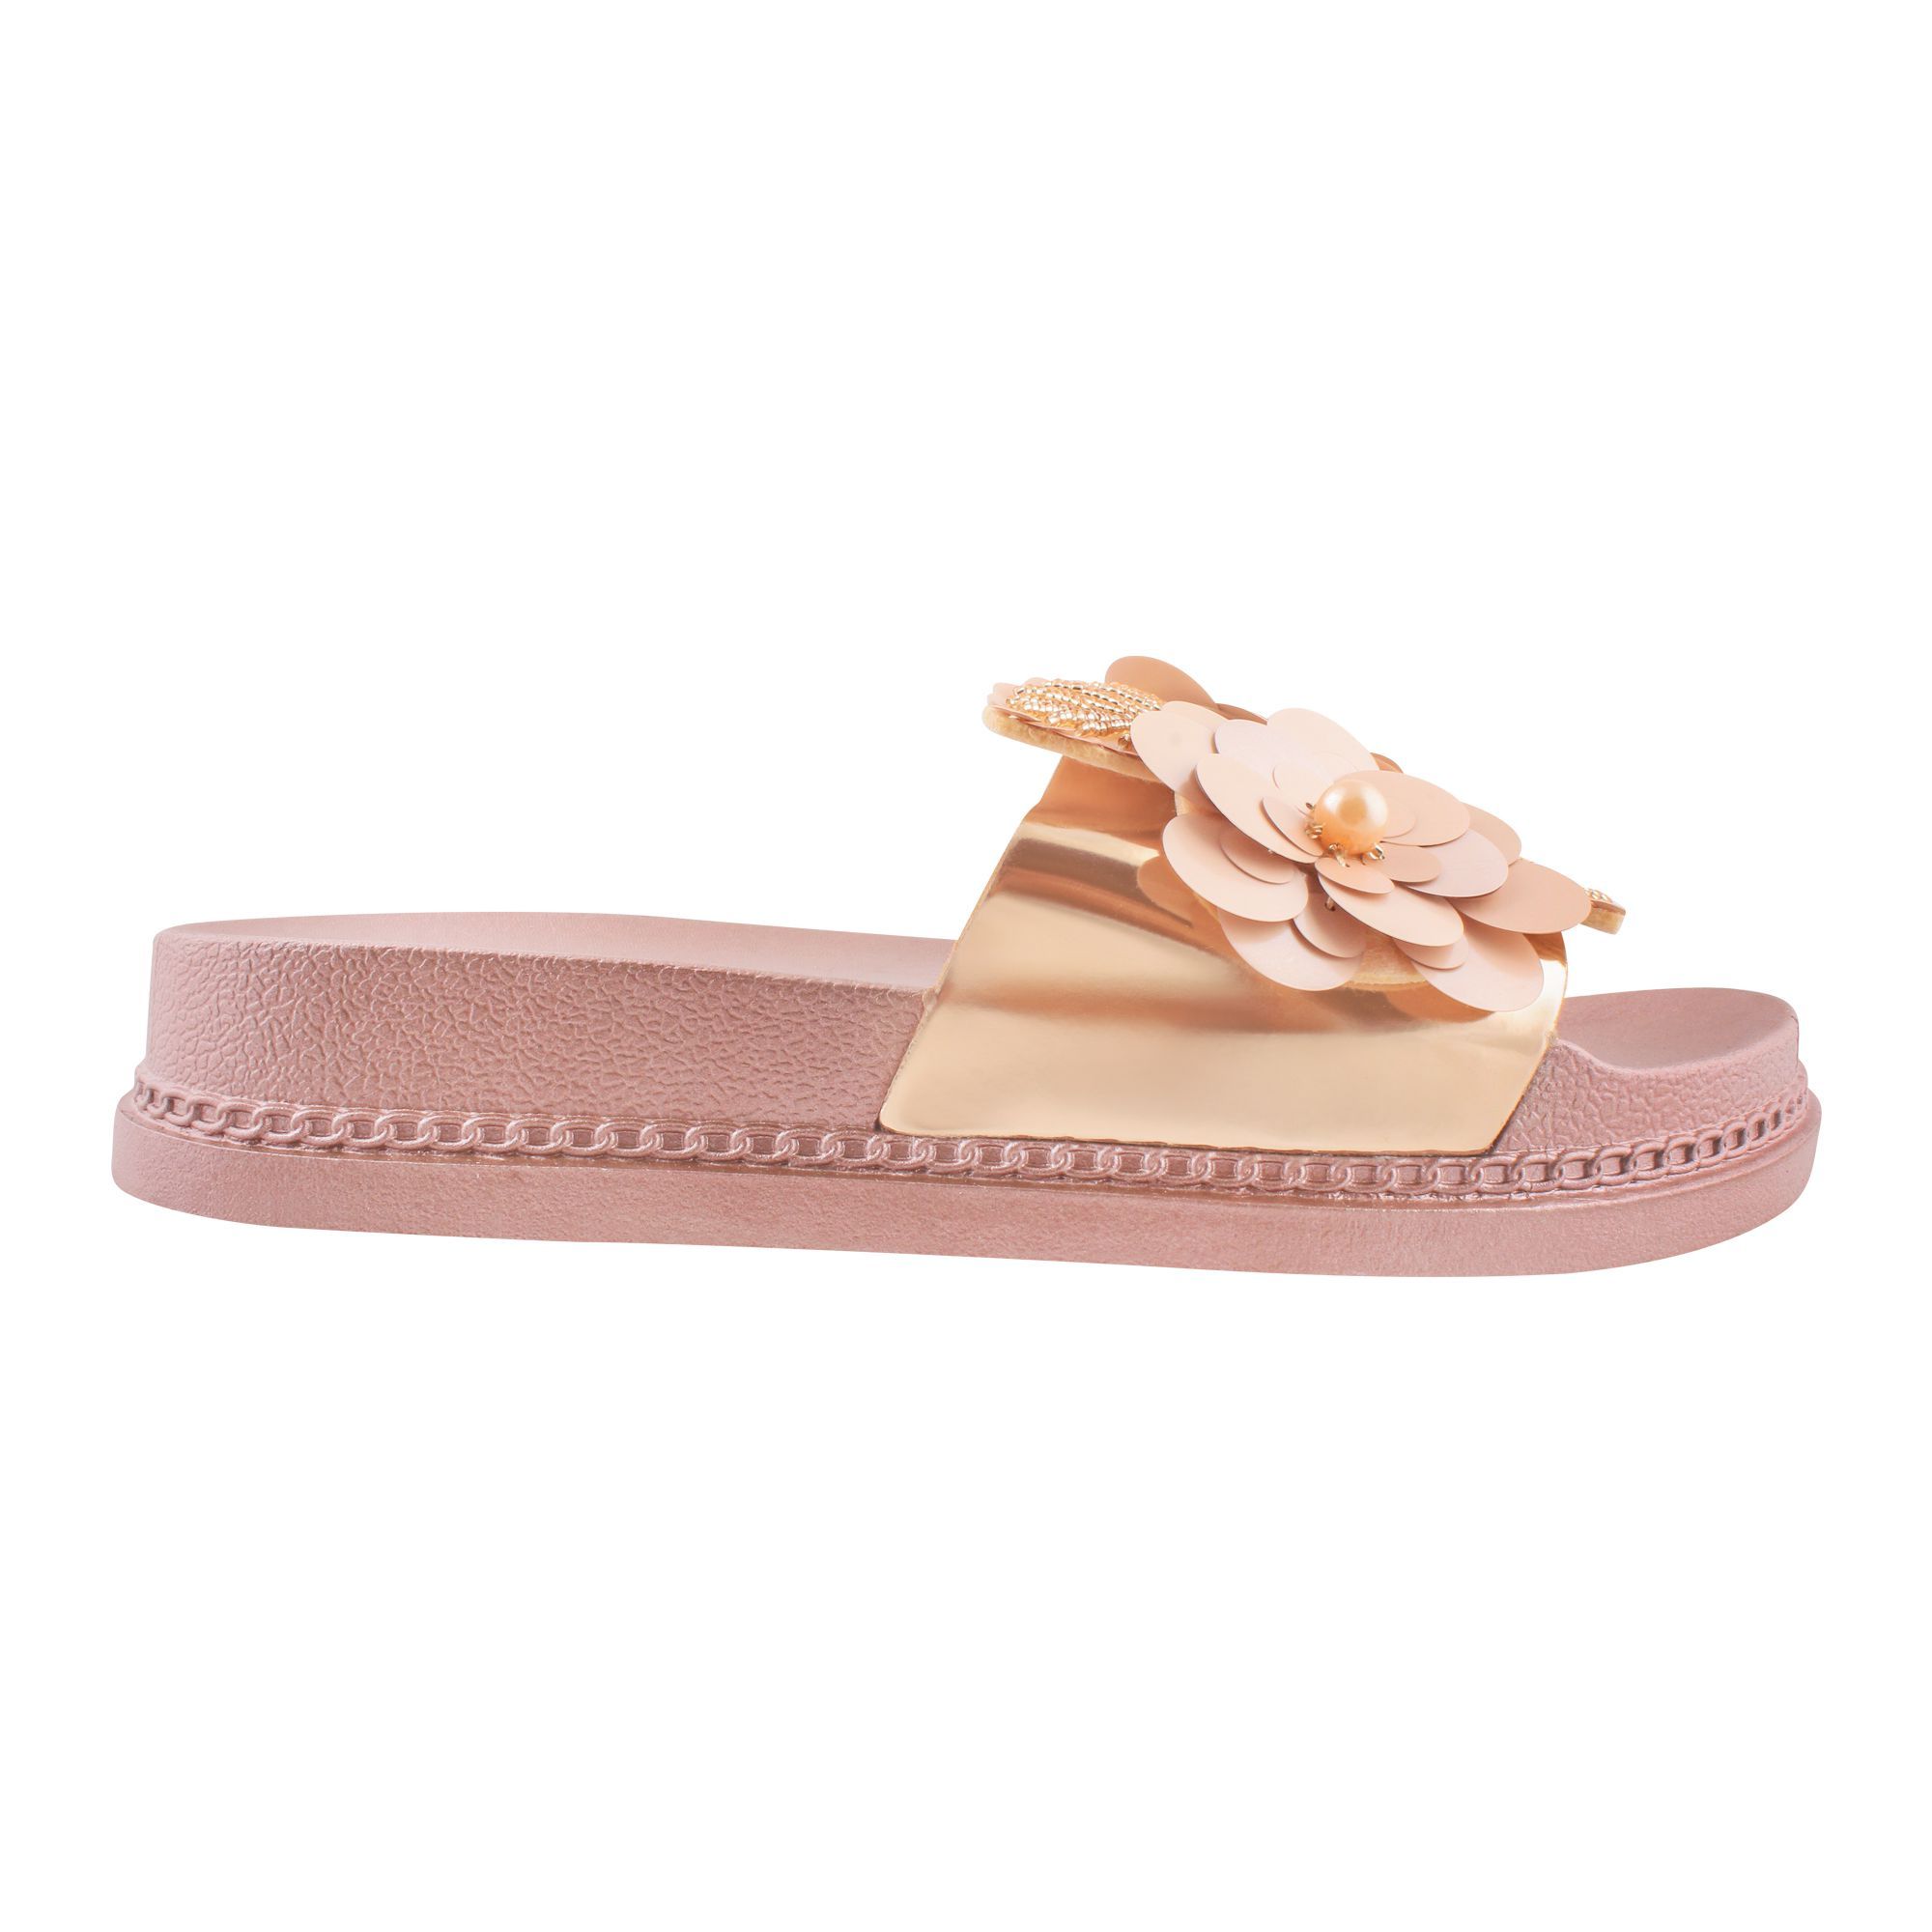 Buy Women's Slippers, A-10, Copper Online at Best Price in Pakistan ...